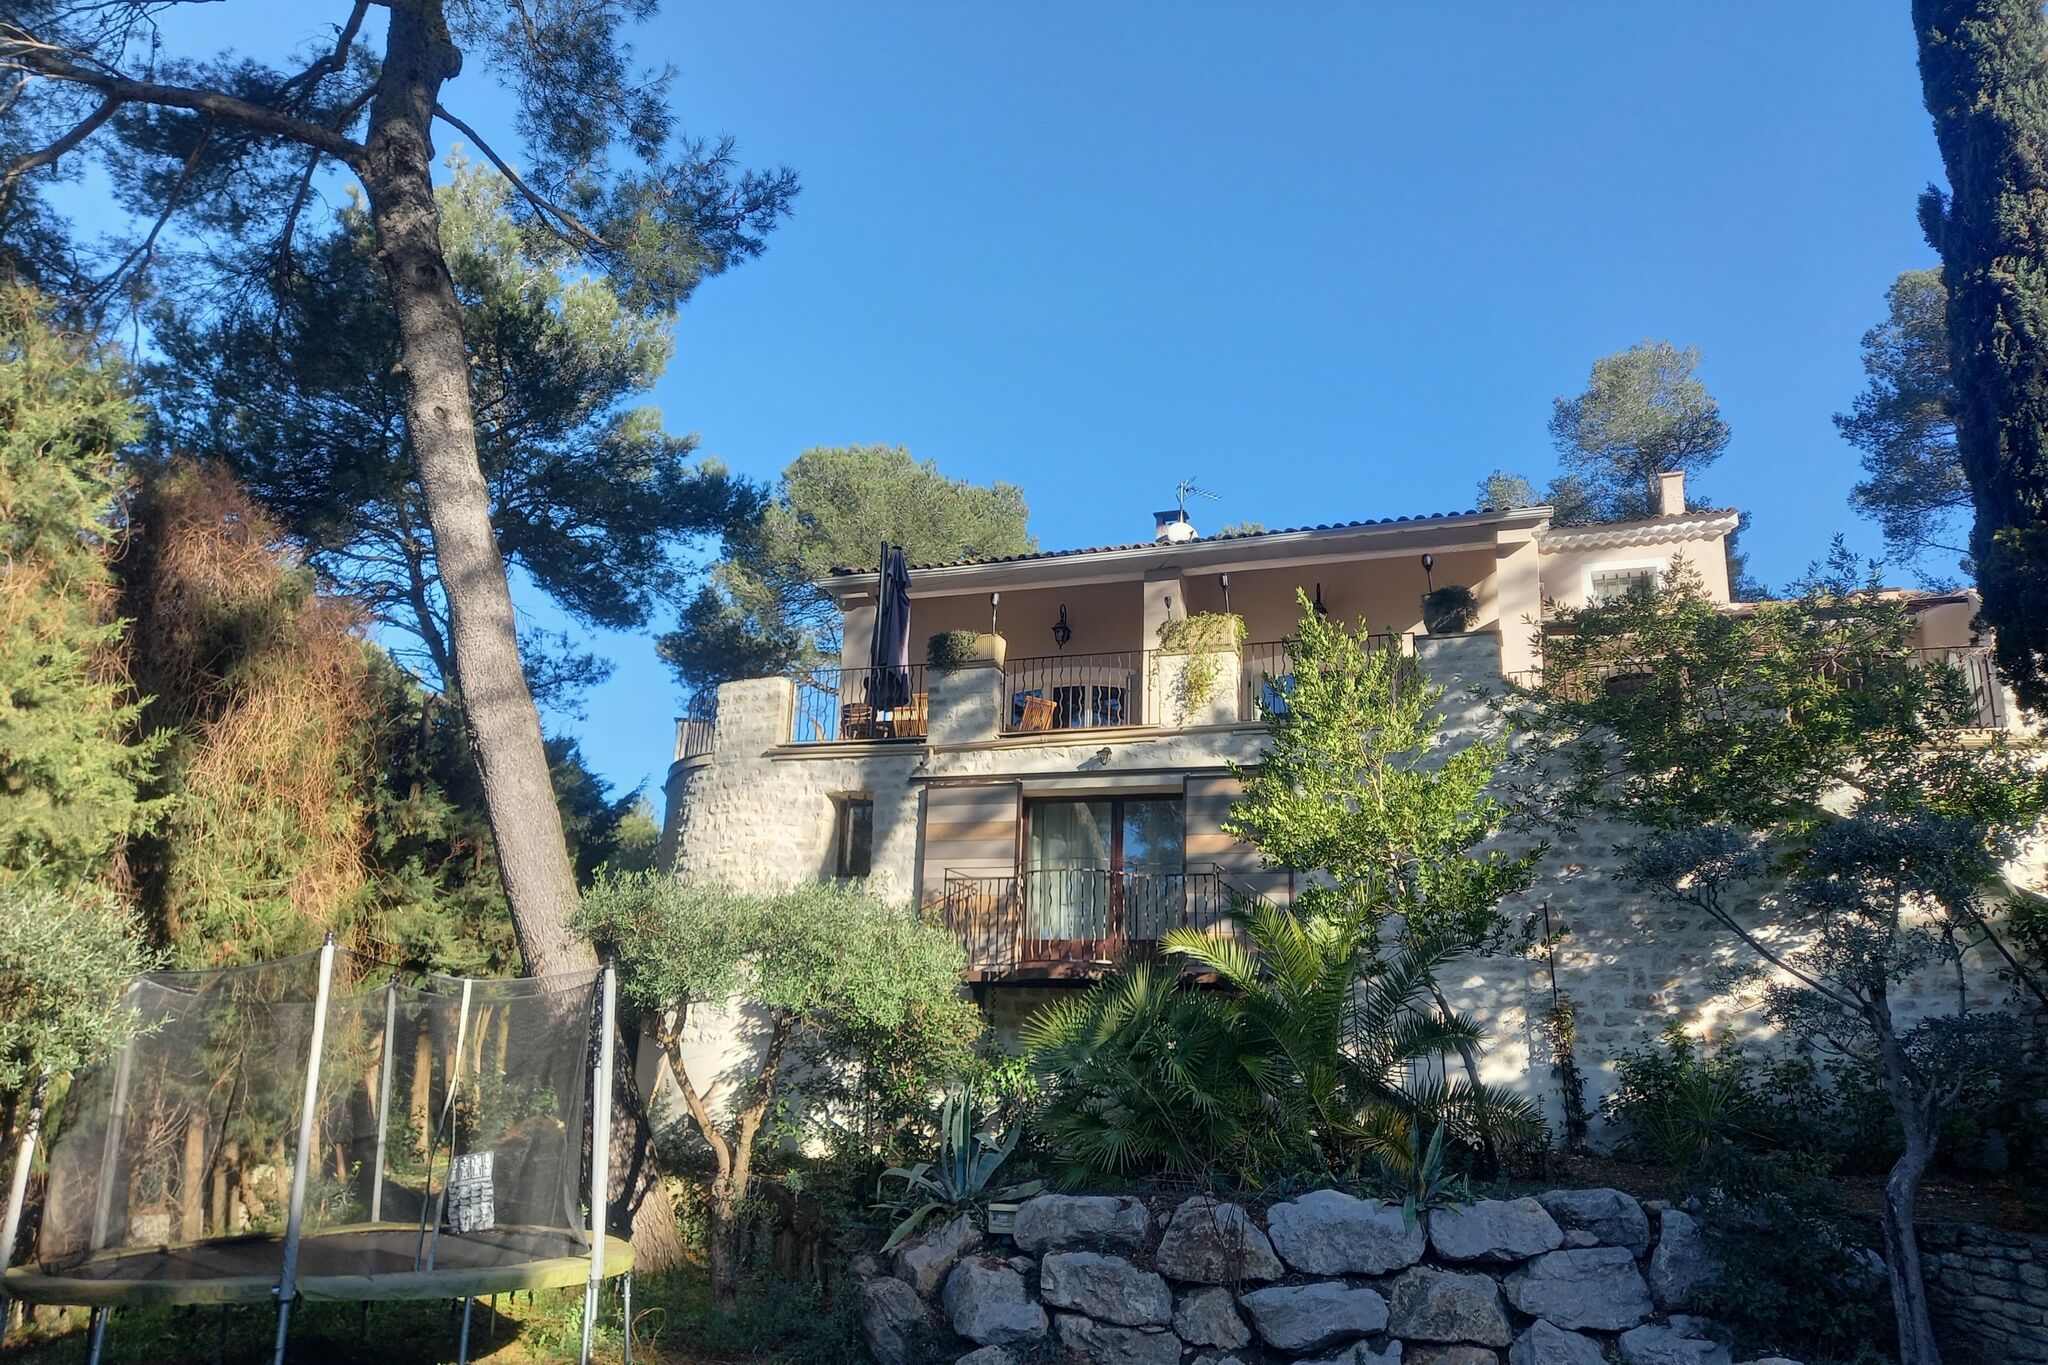 A hidden paradise in the beautiful surroundings of Saint-Remy-de-Provence!